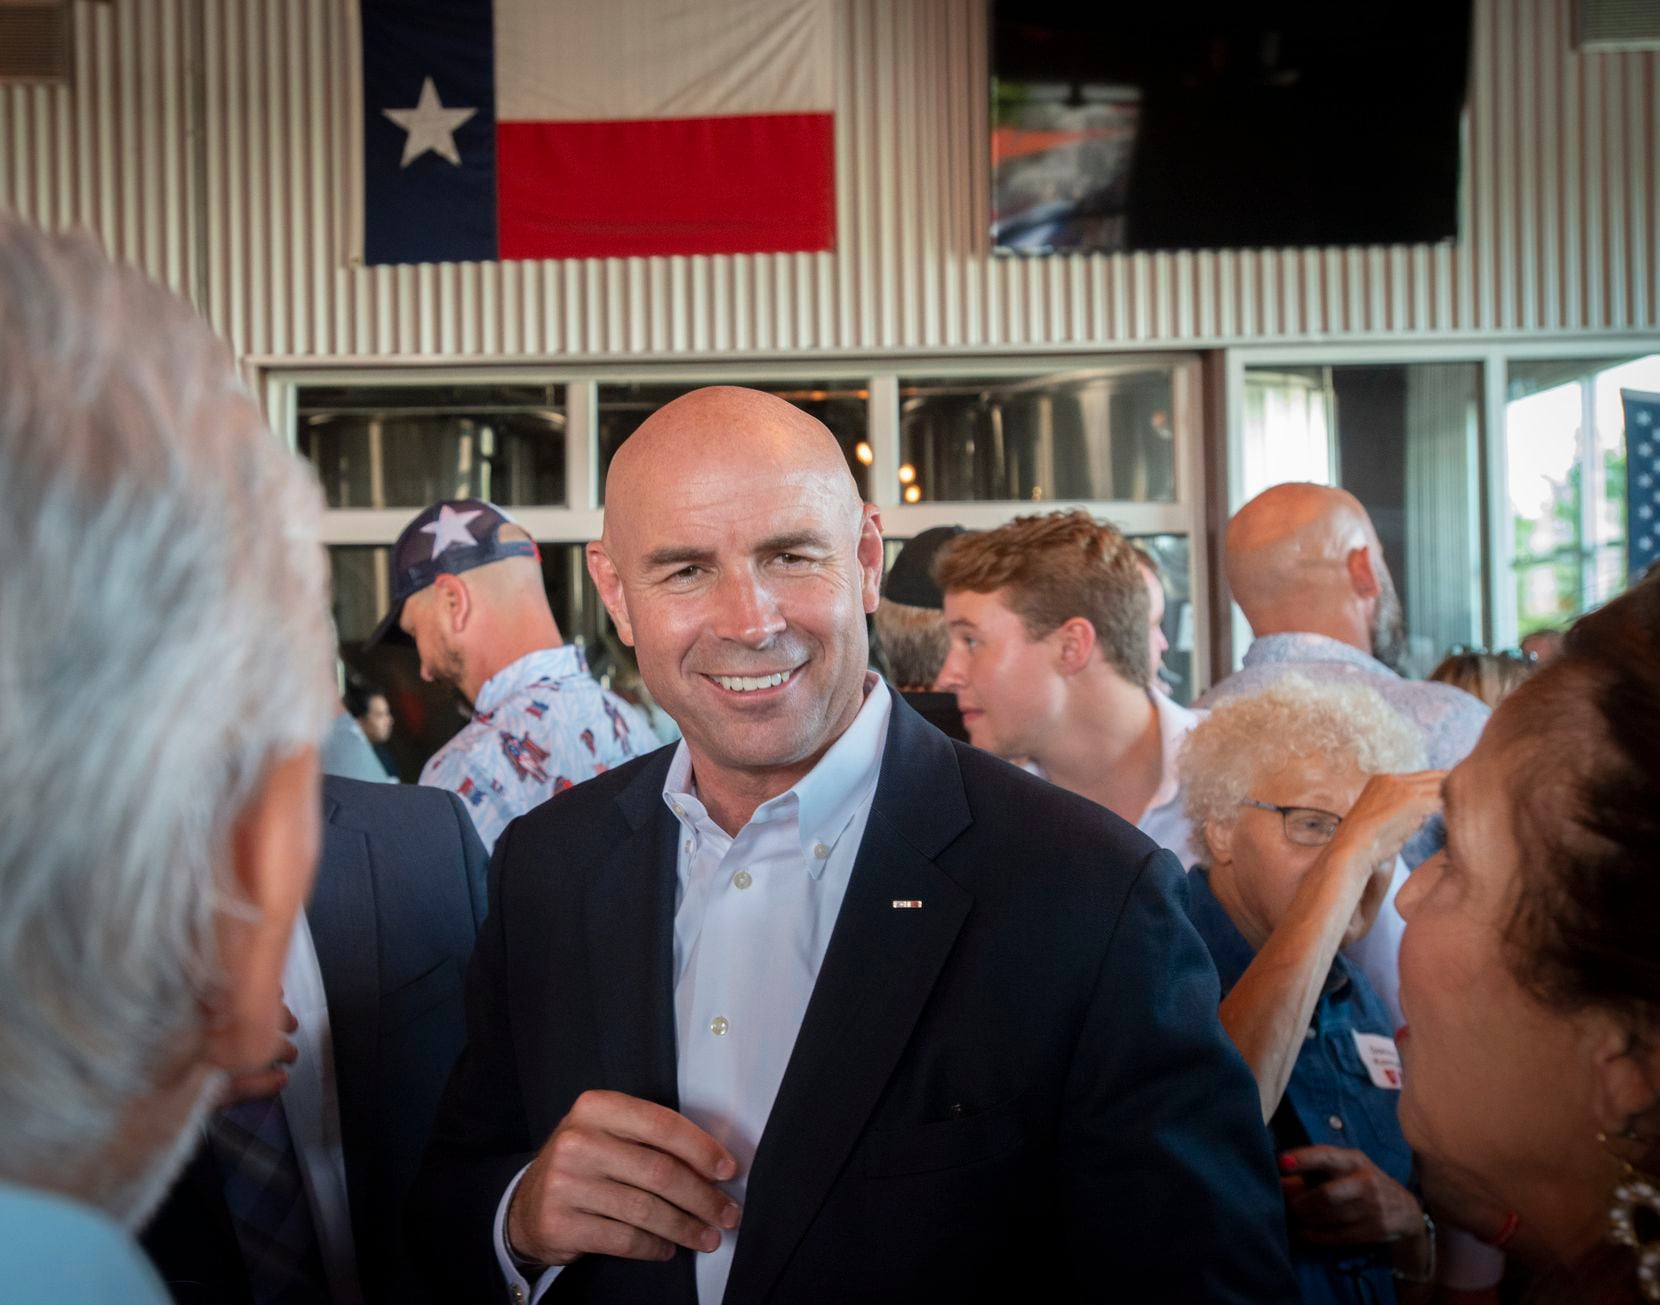 Congressional District 6 candidate Jake Ellzey talks with supporters during an evening fundraiser at Legal Draft in Arlington, Texas on July 14,, 2021. (Robert W. Hart/Special Contributor)